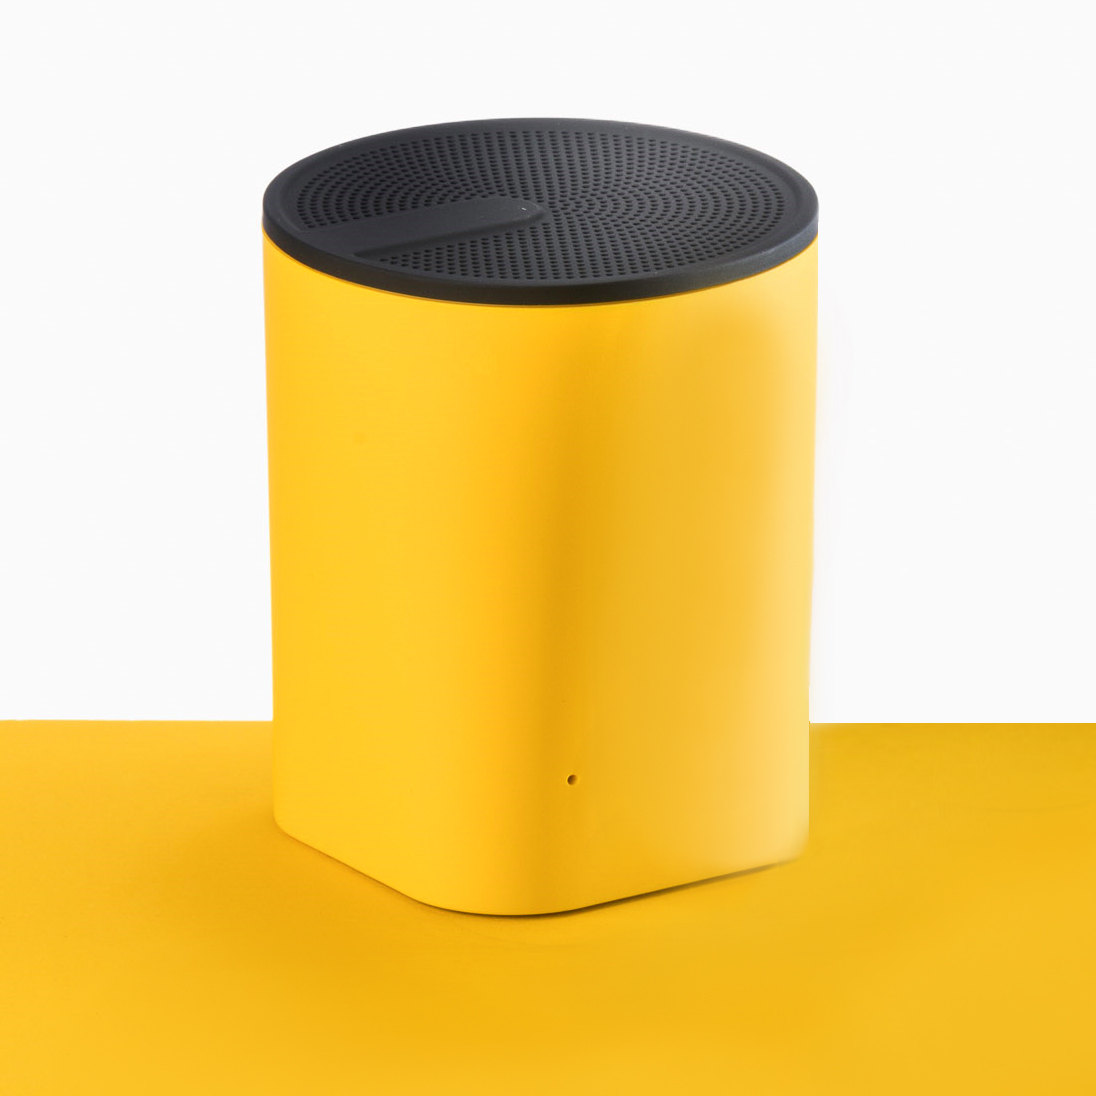 Yellow Colour Sound Compact Speaker